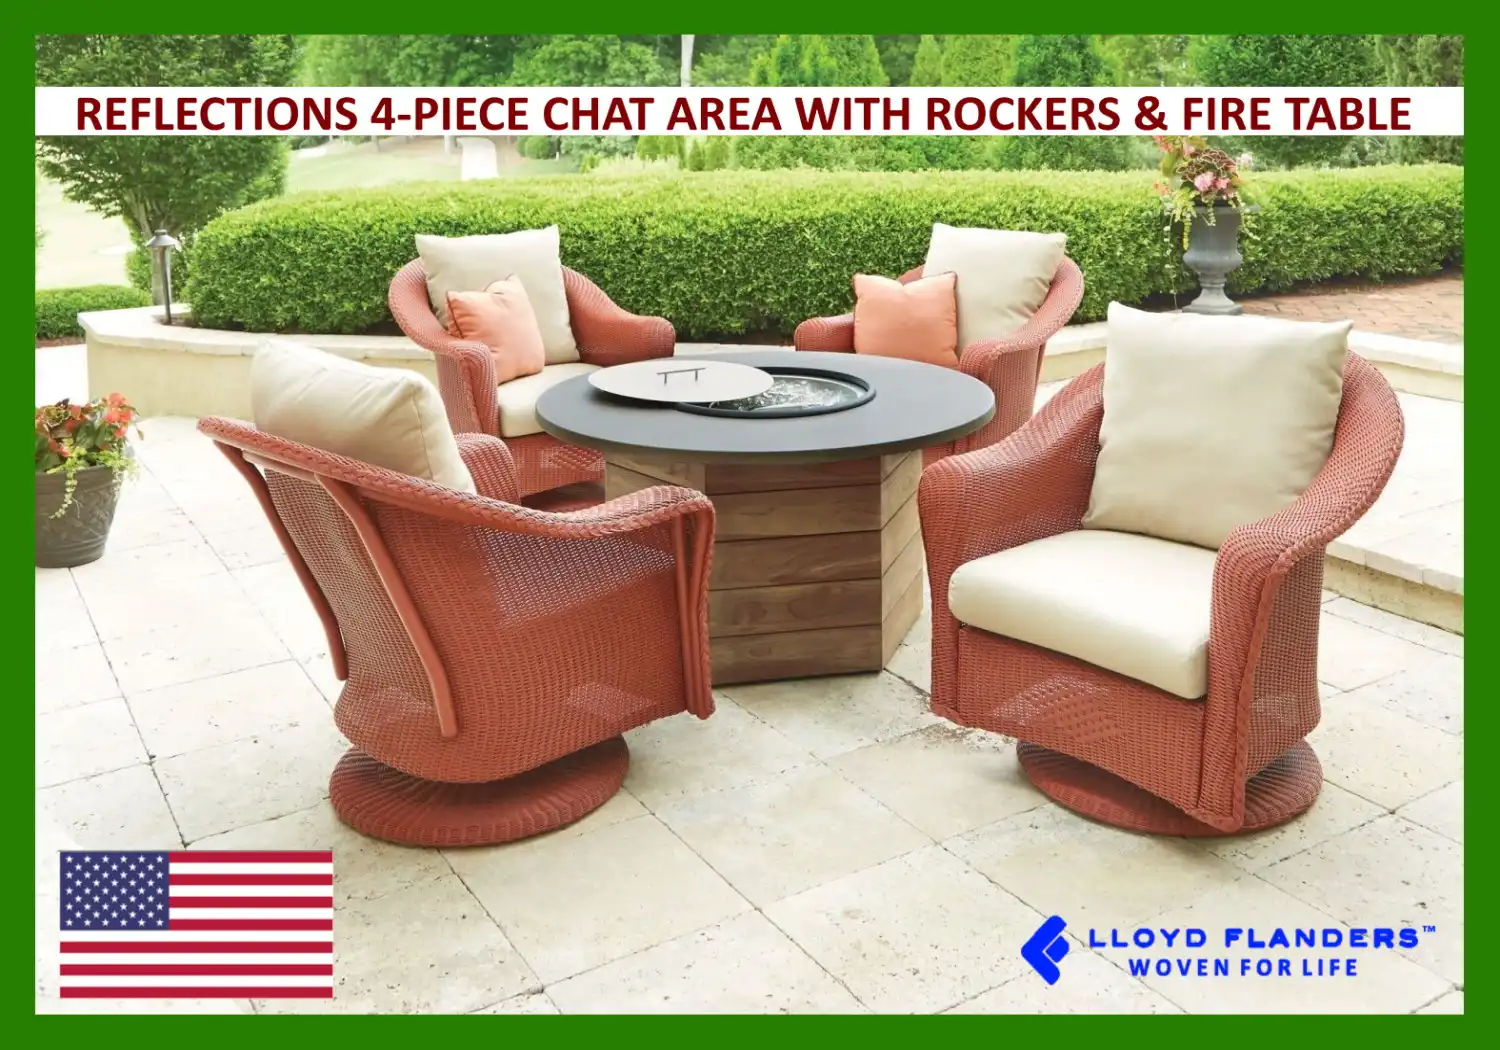 REFLECTIONS 4-PIECE CHAT AREA WITH ROCKERS & FIRE TABLE